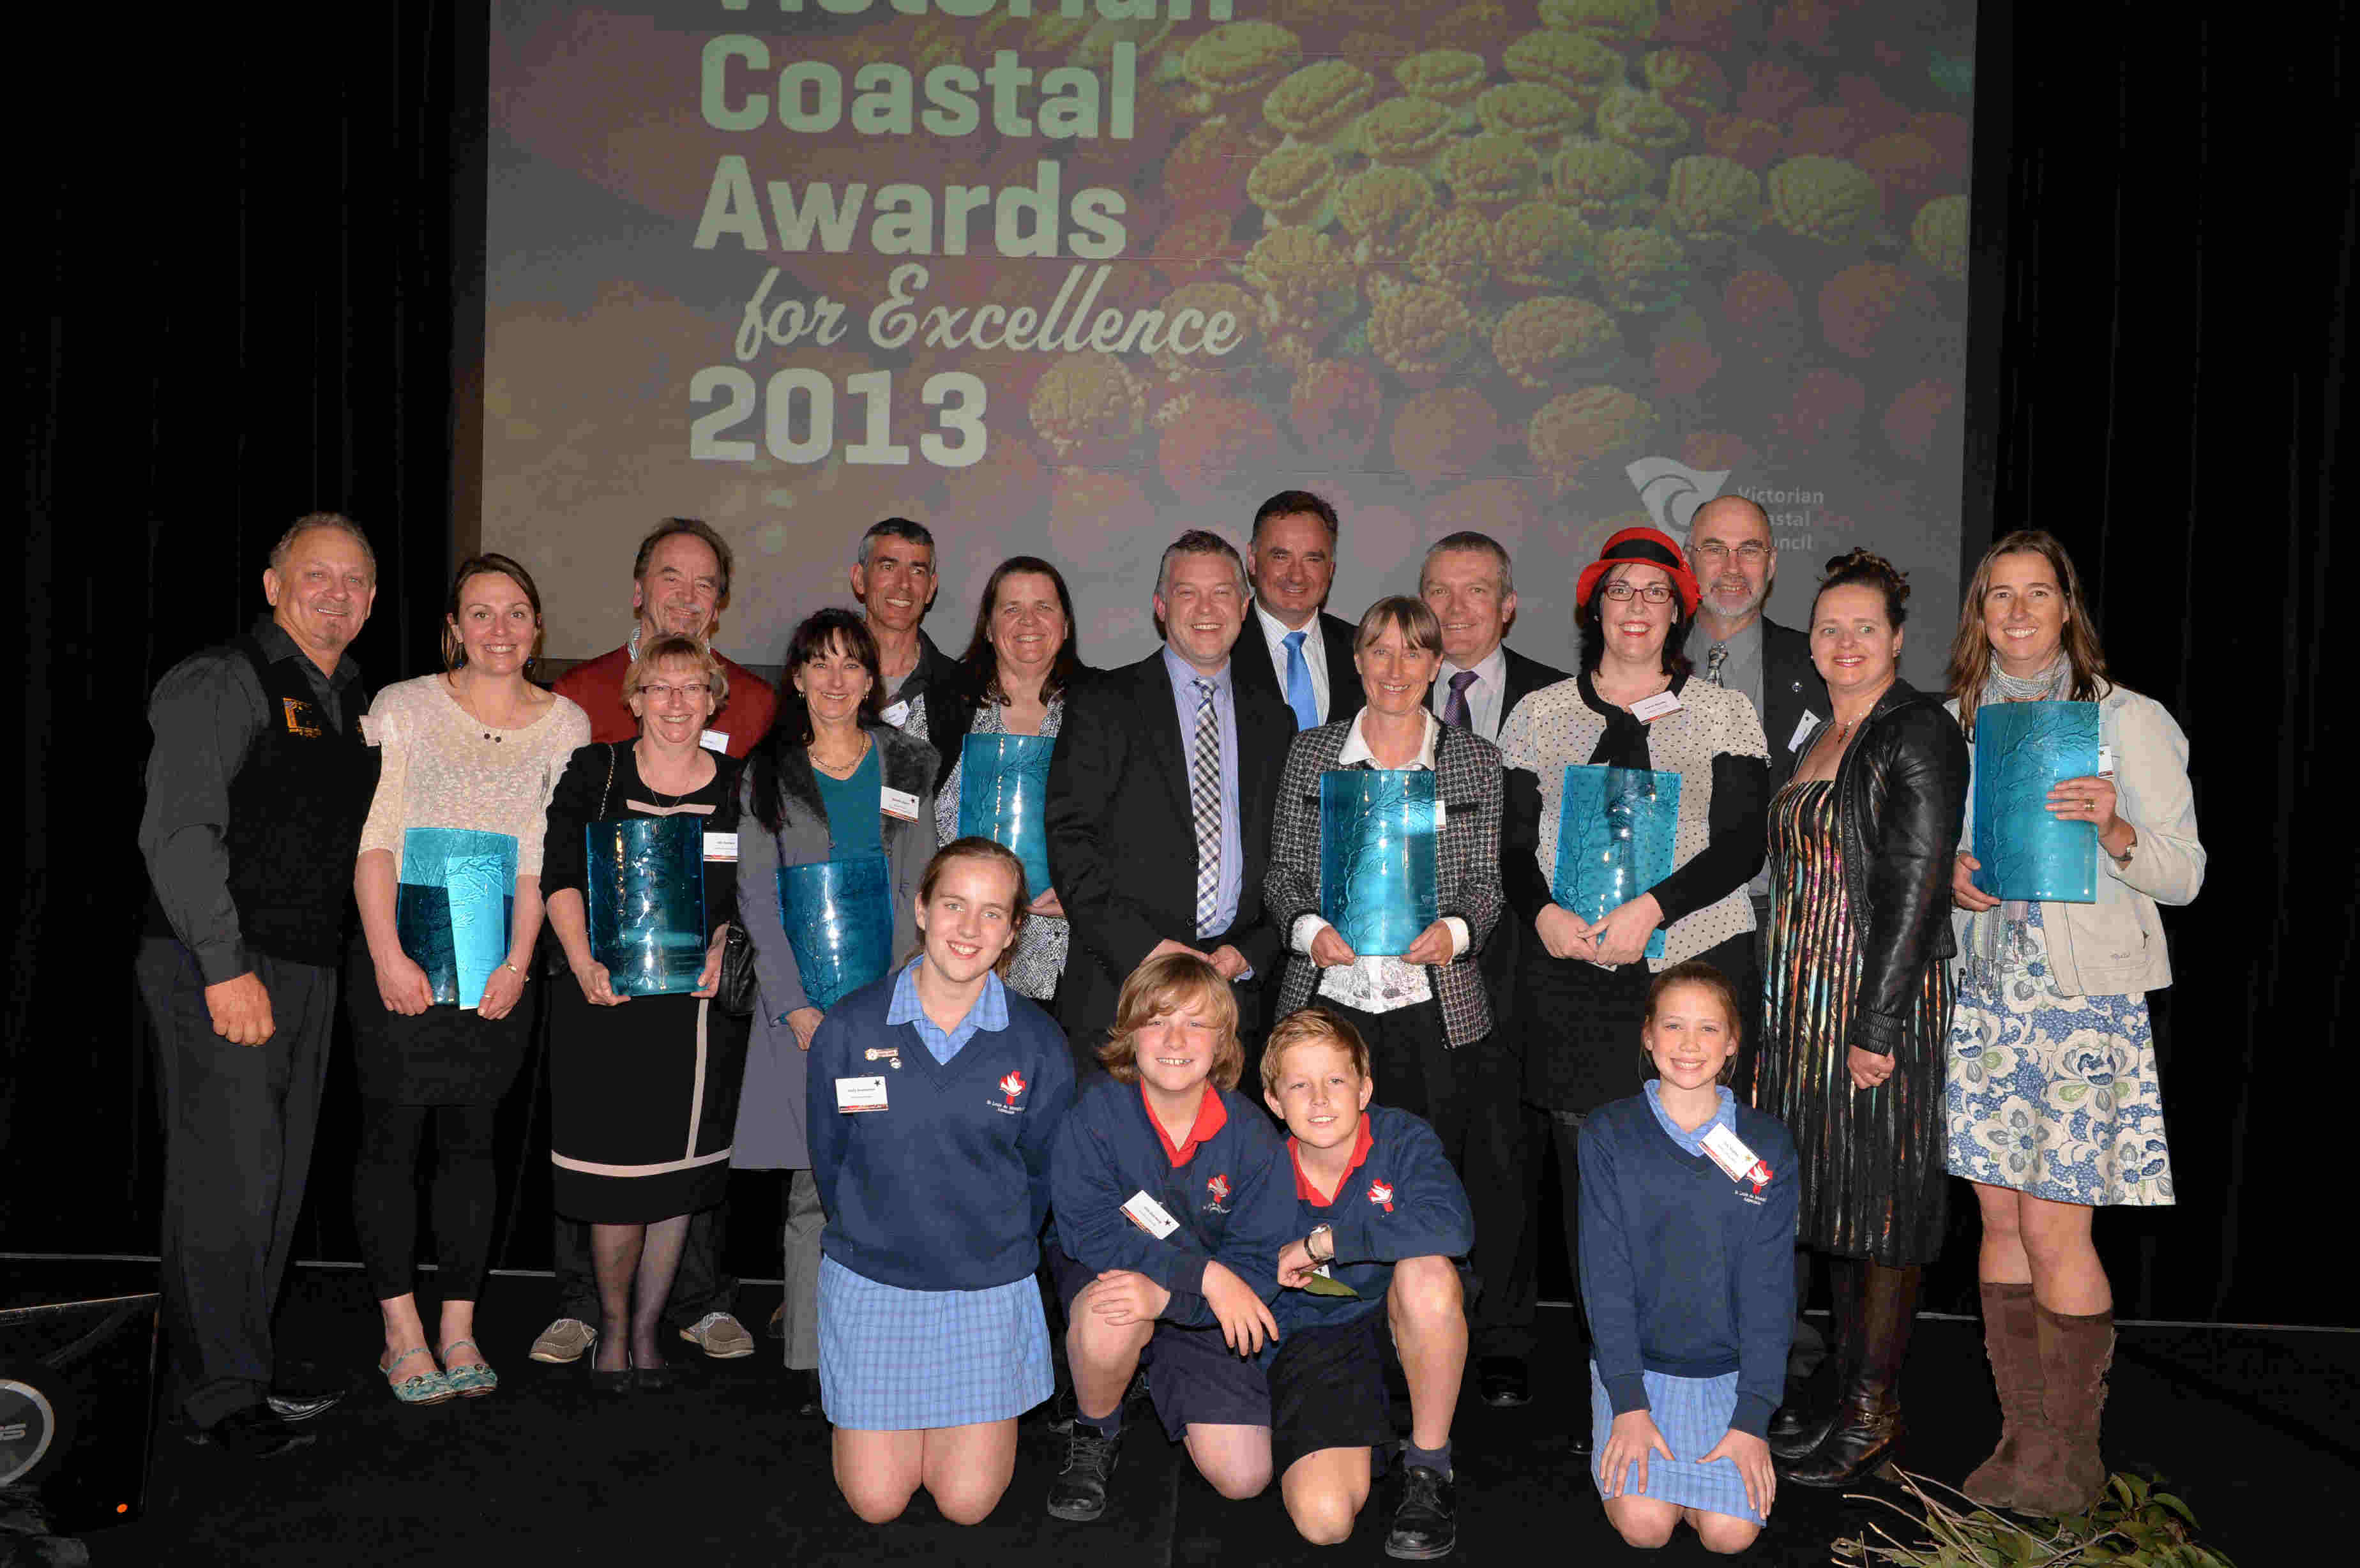 Winners of the 2013 Victoraian Coastal Awards fro Excellence